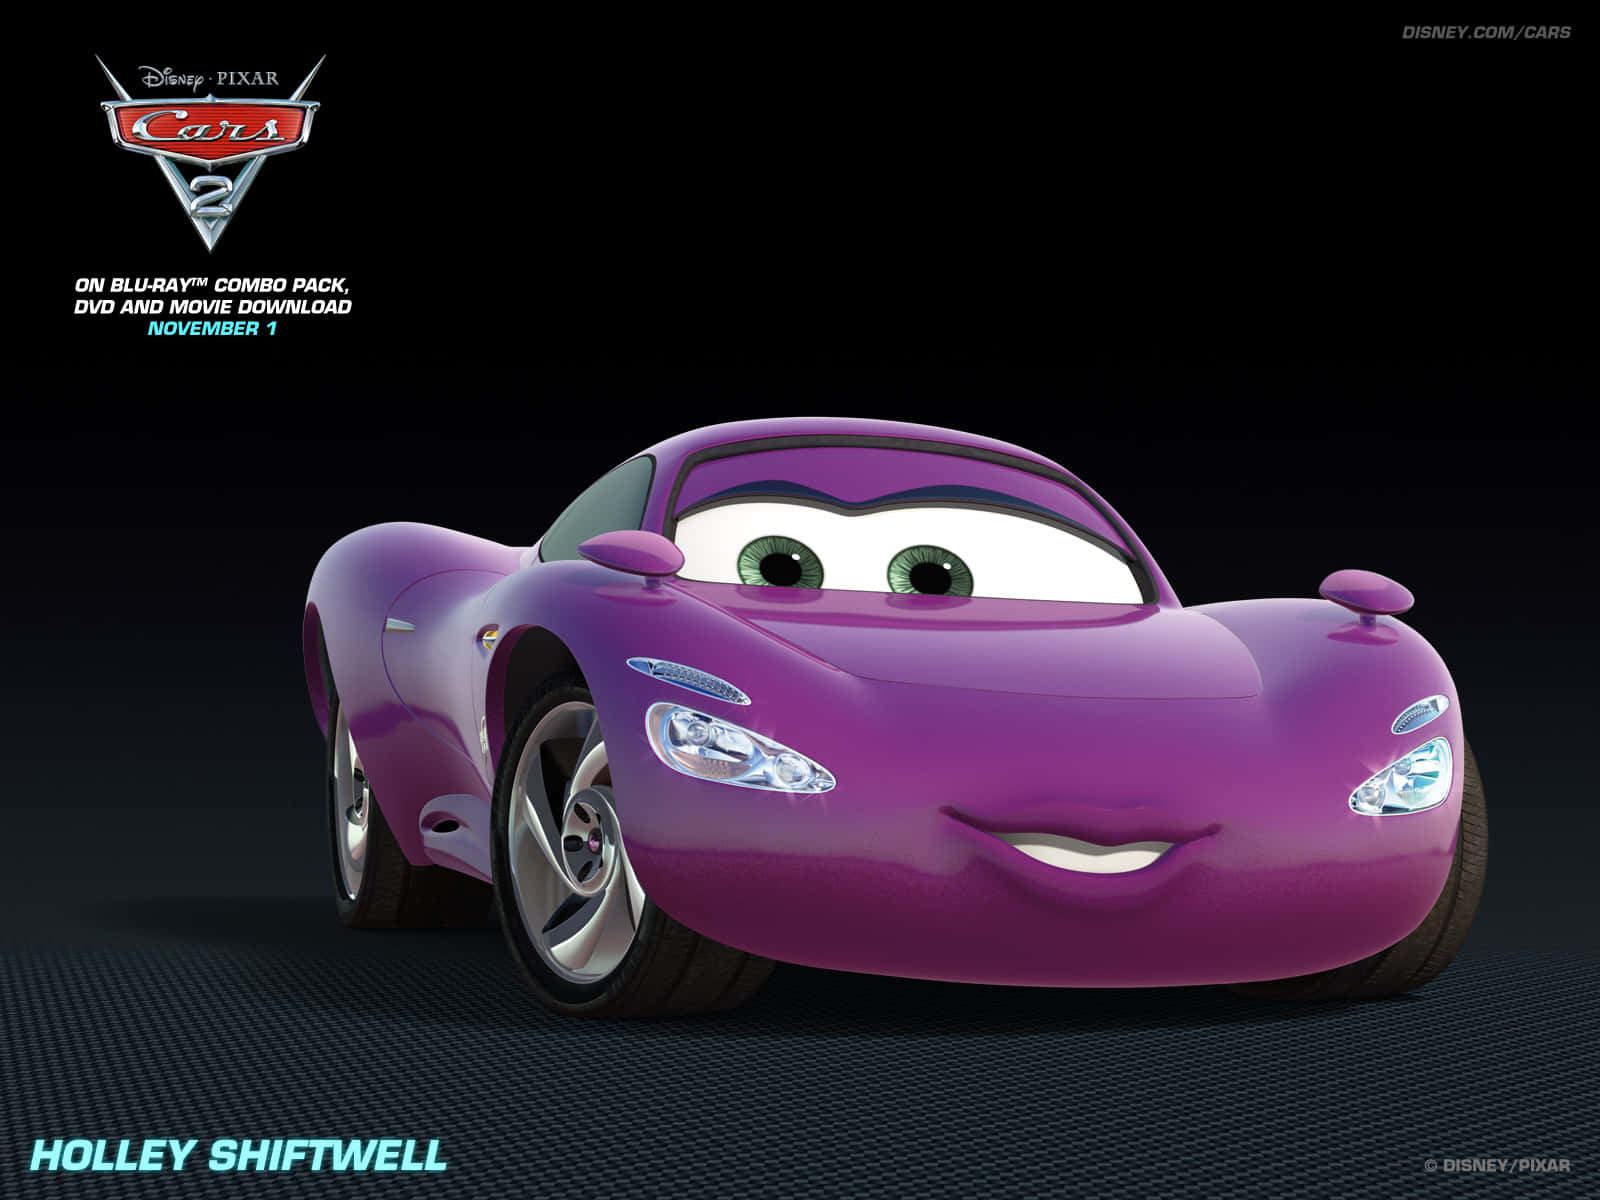 Join Lighting McQueen, Mater, and the rest of Cars 2 for an international race!